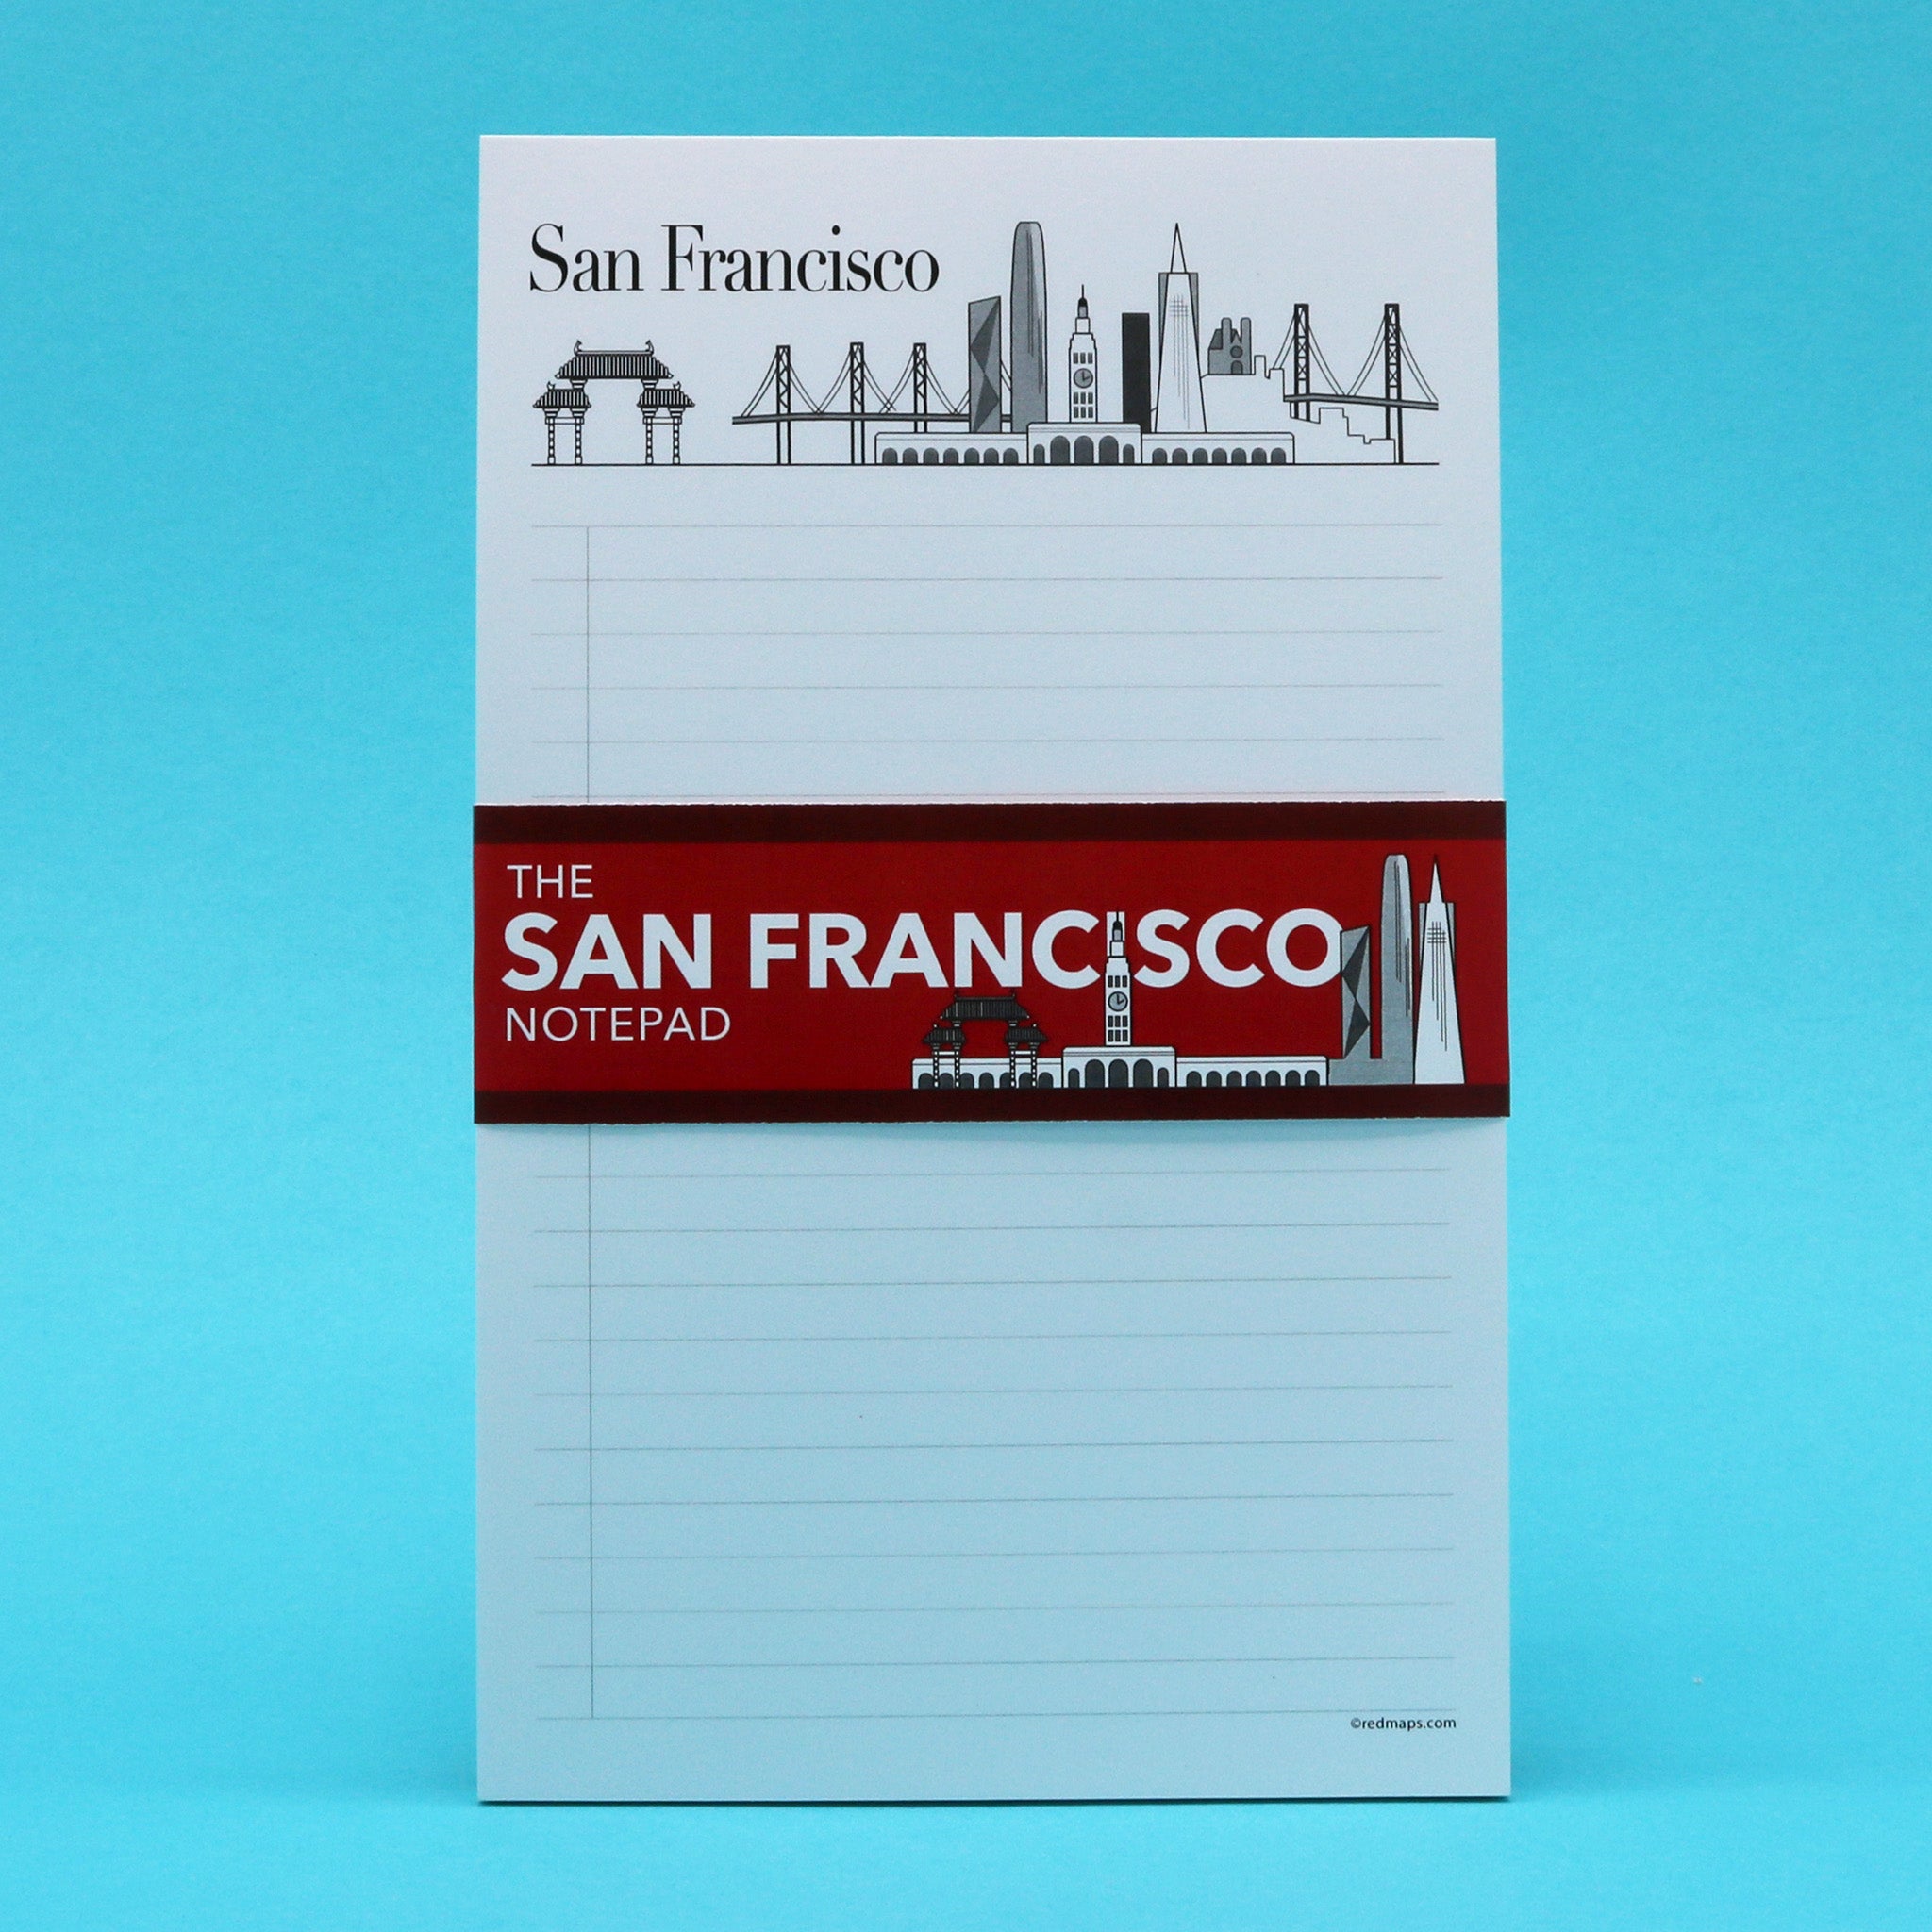 San Francisco themed writing pad with illustrations of the city's skyline and historic landmarks.